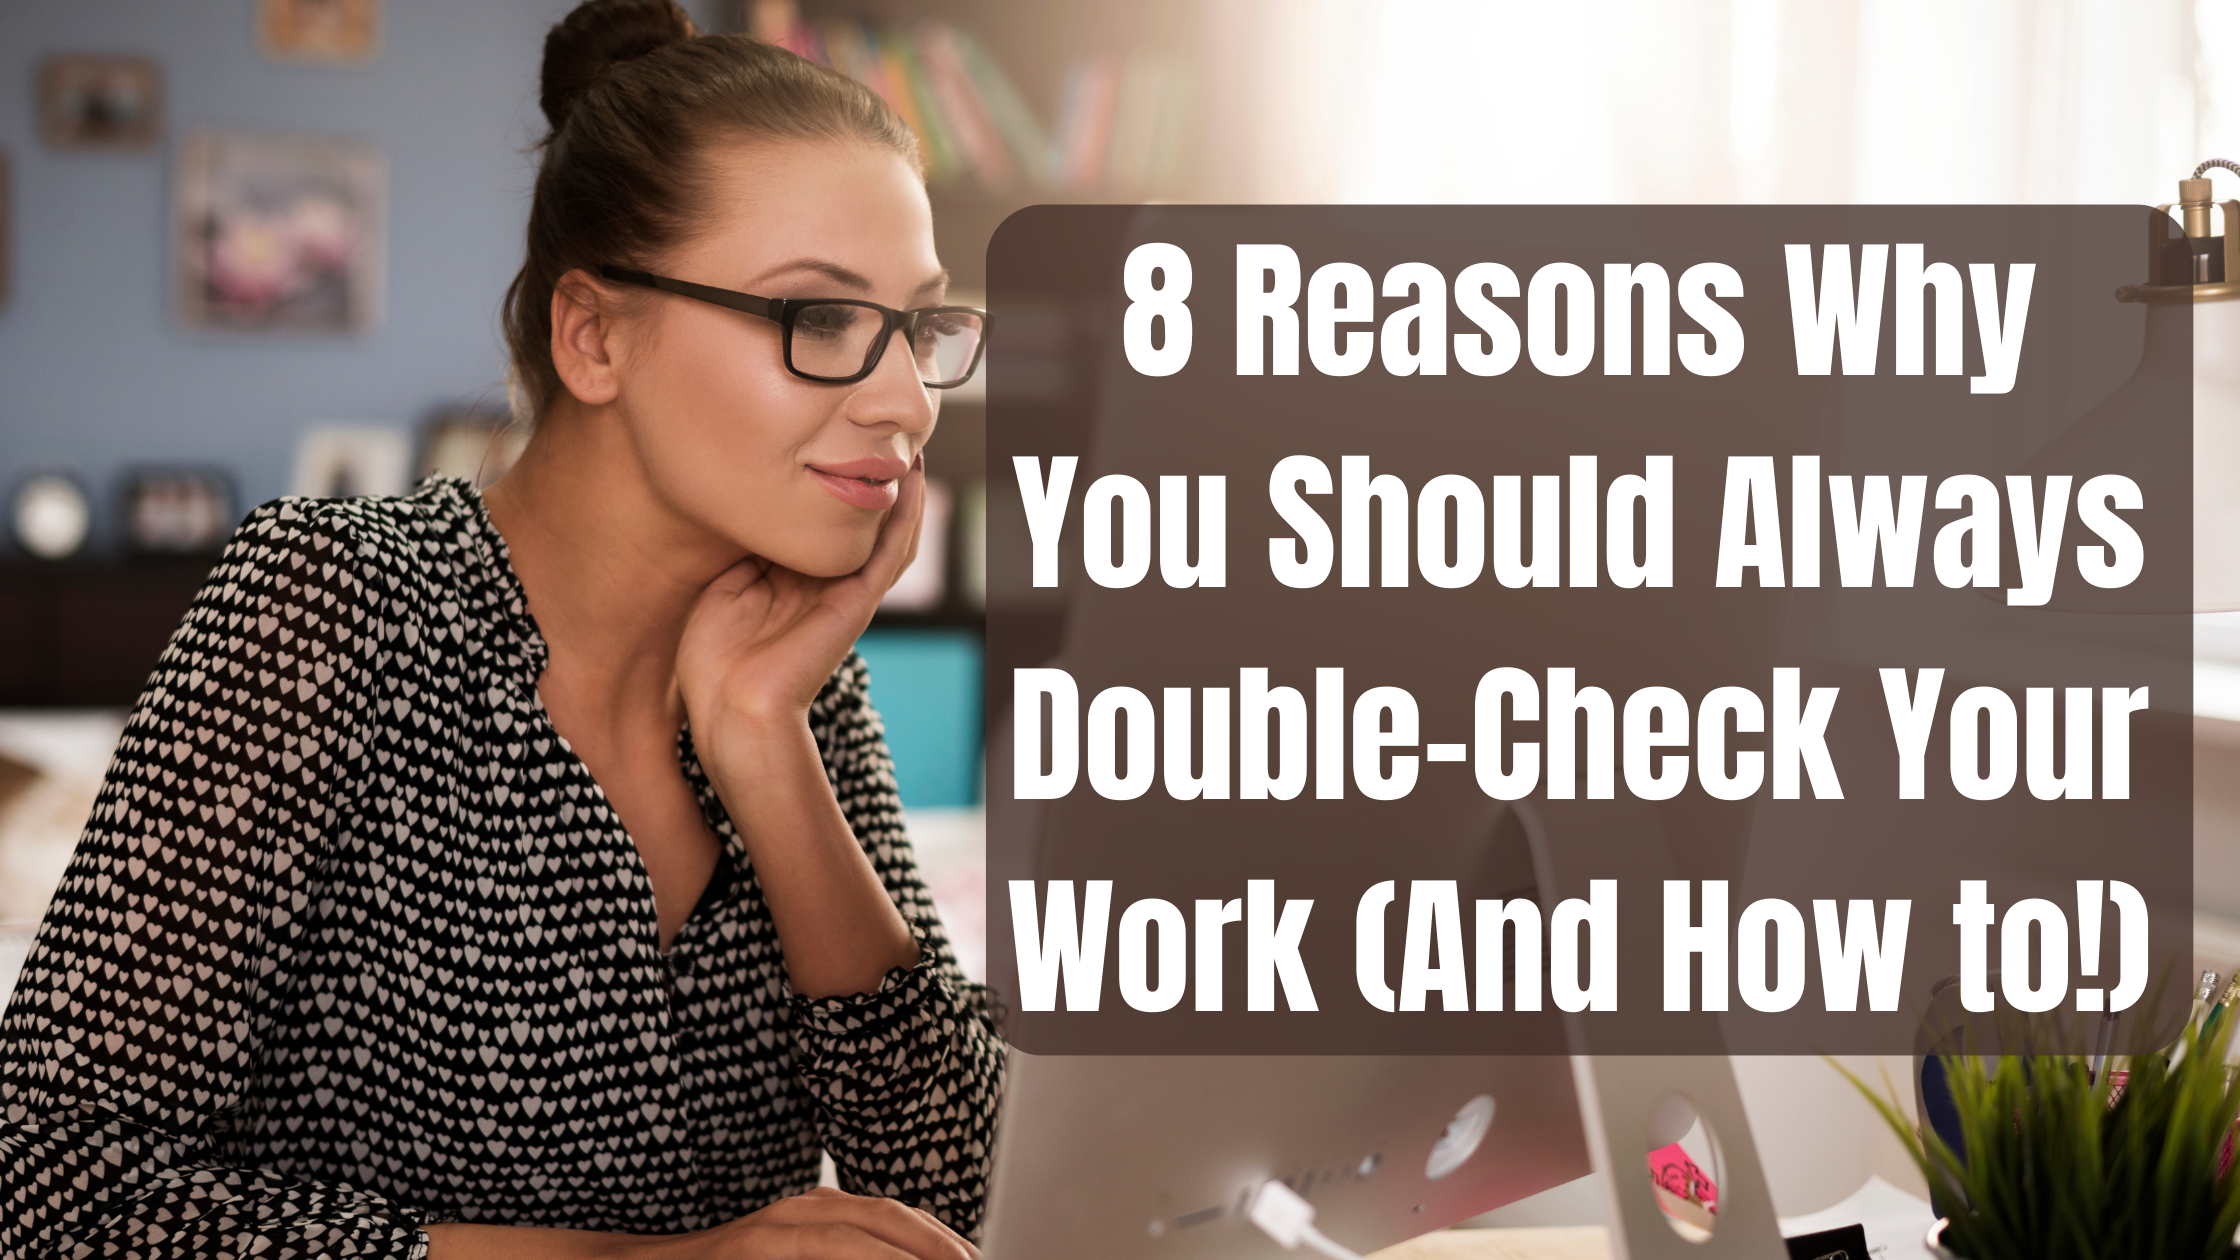 8 Reasons Why You Should Always Double-Check Your Work (And How to